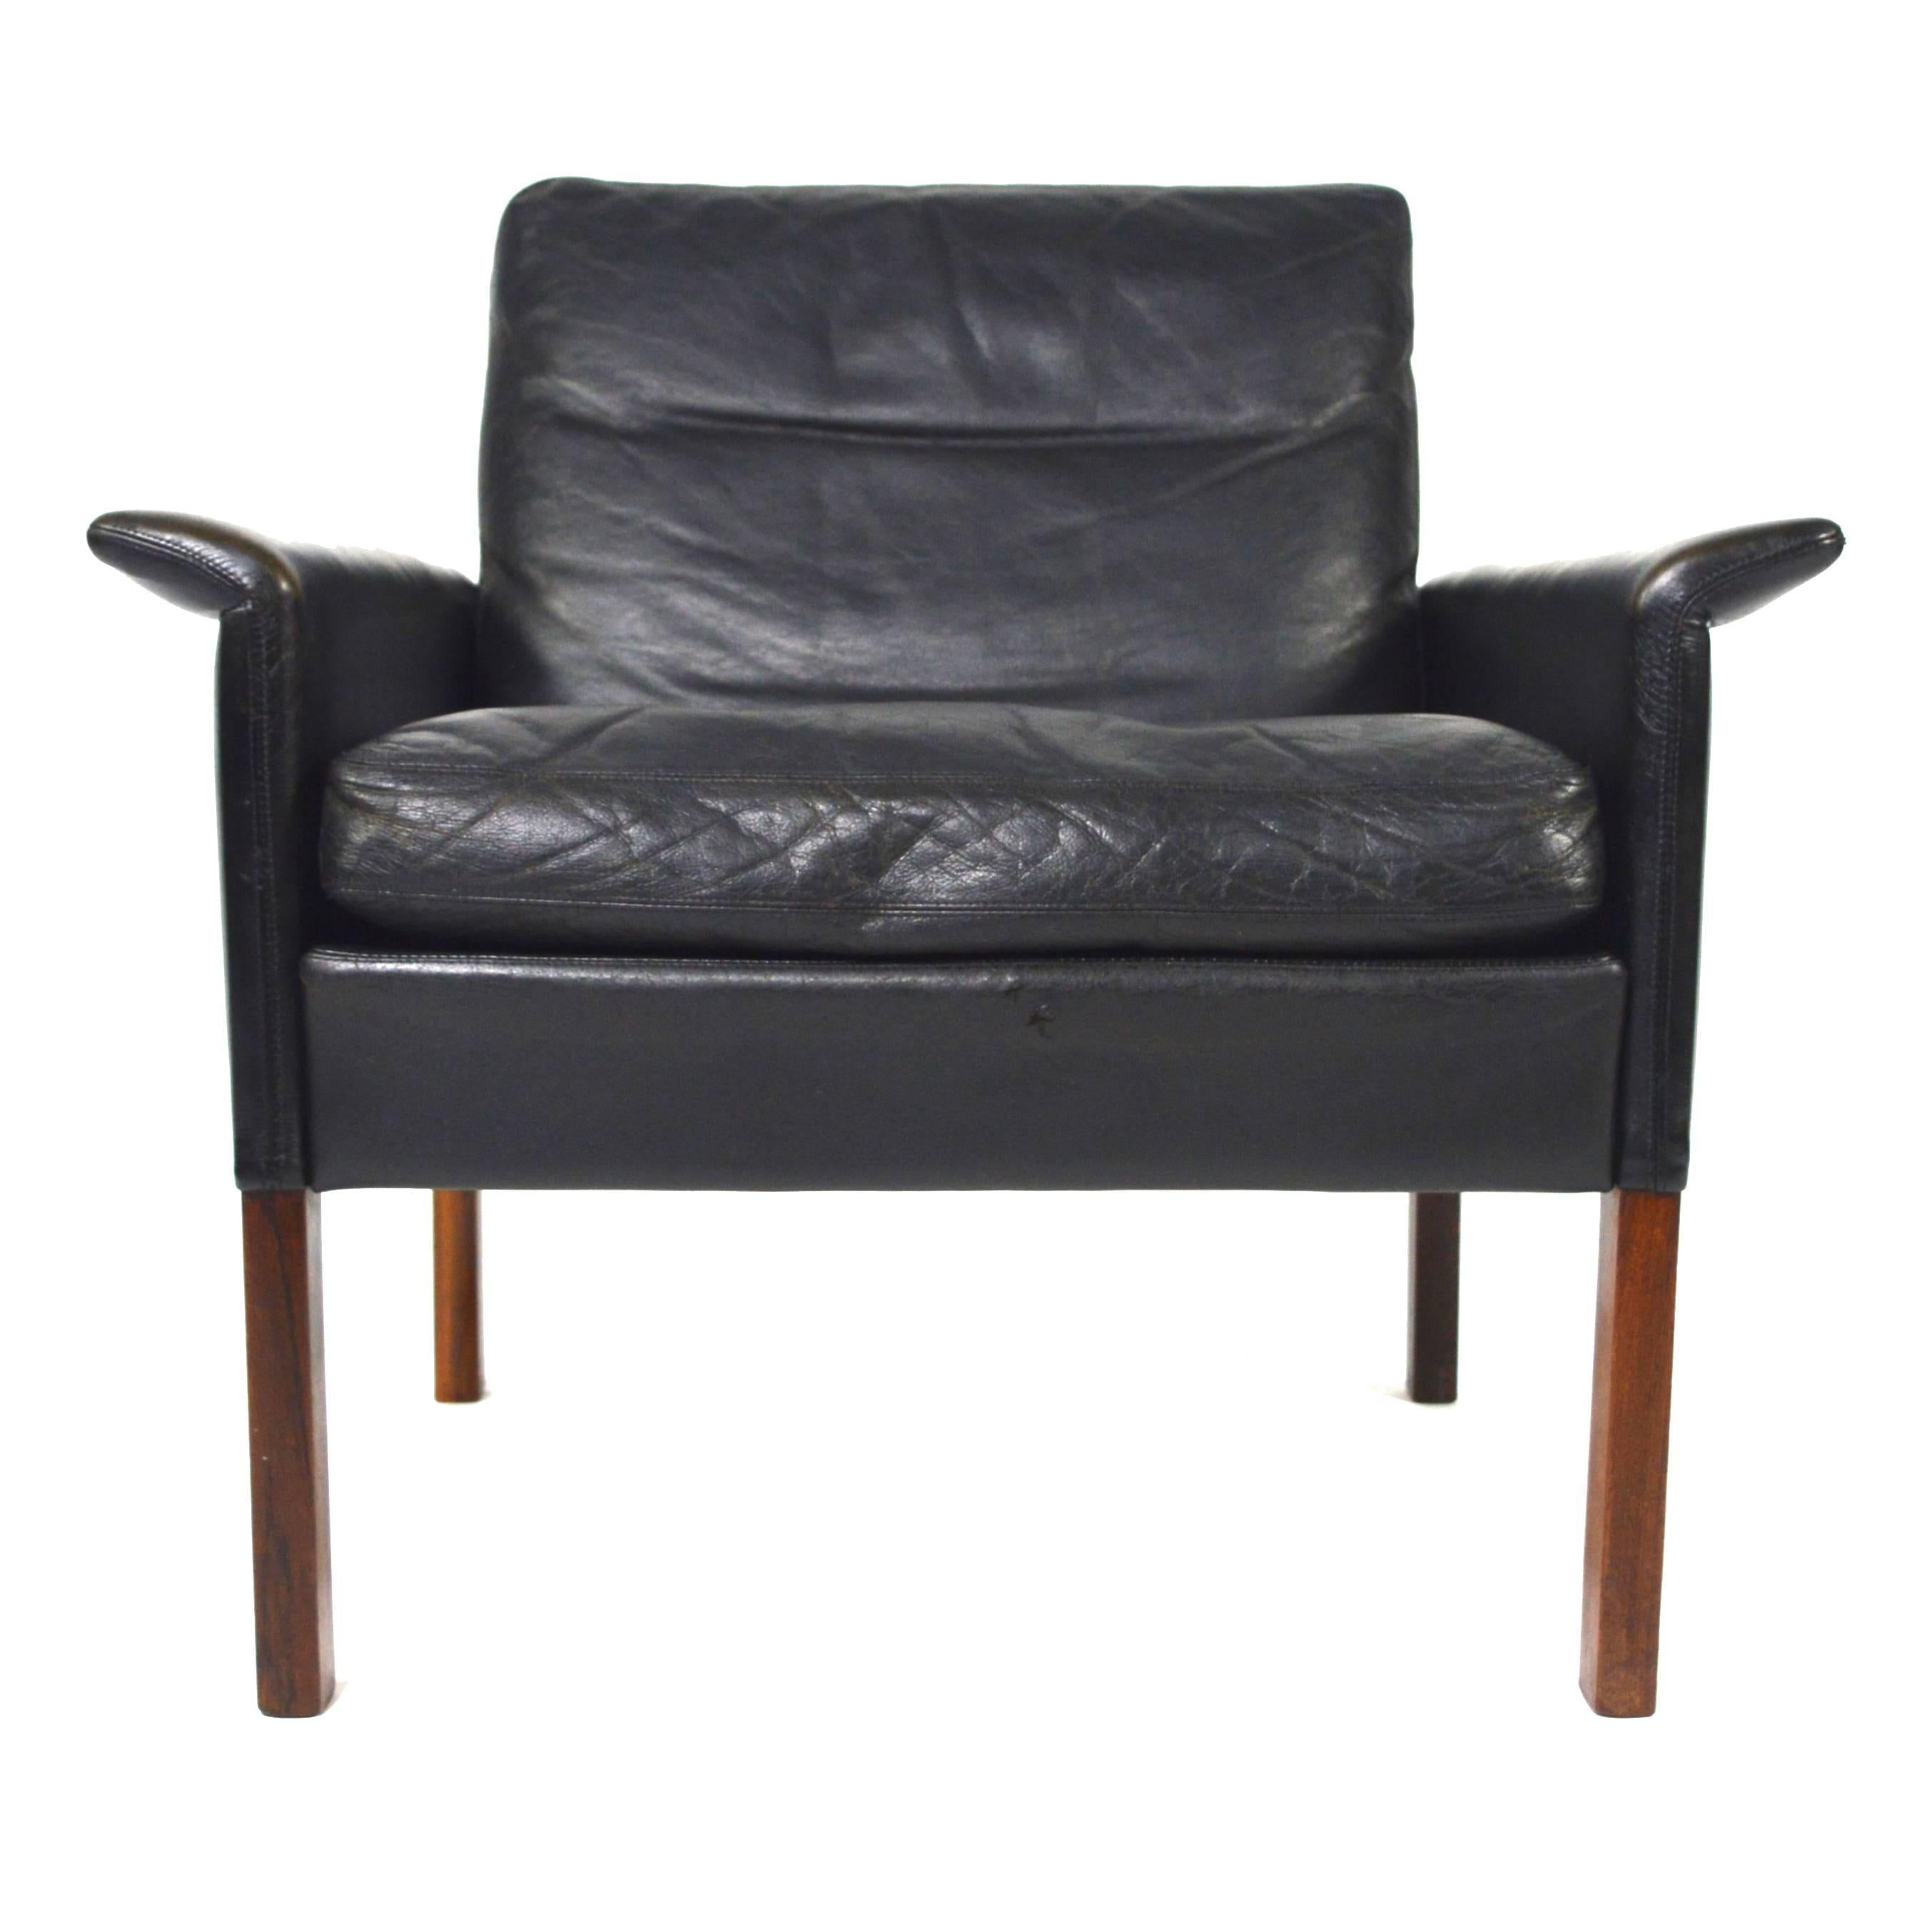 Hans Olsen Model 500 Lounge Chair in Black Leather and Rosewood, Denmark, 1960s